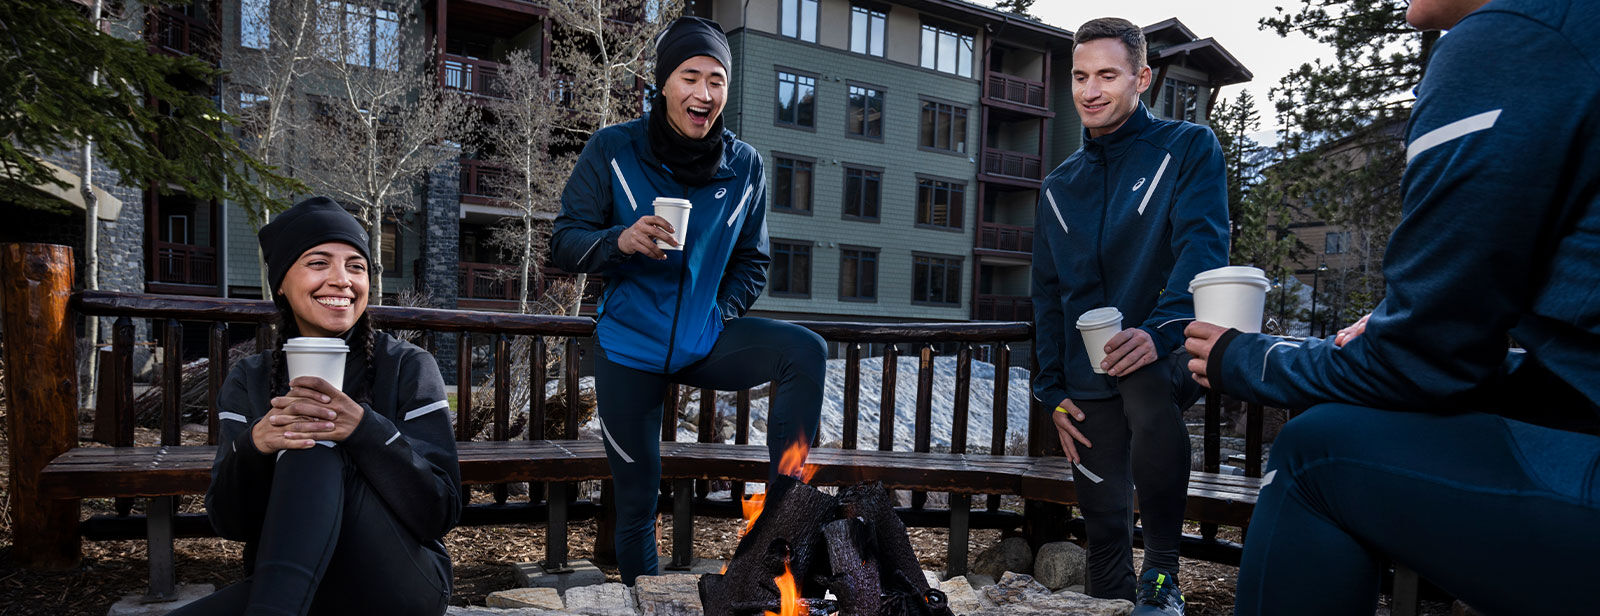 How to Fight the Winter Blues: Tips to Improve Your Mood And Energy | ASICS